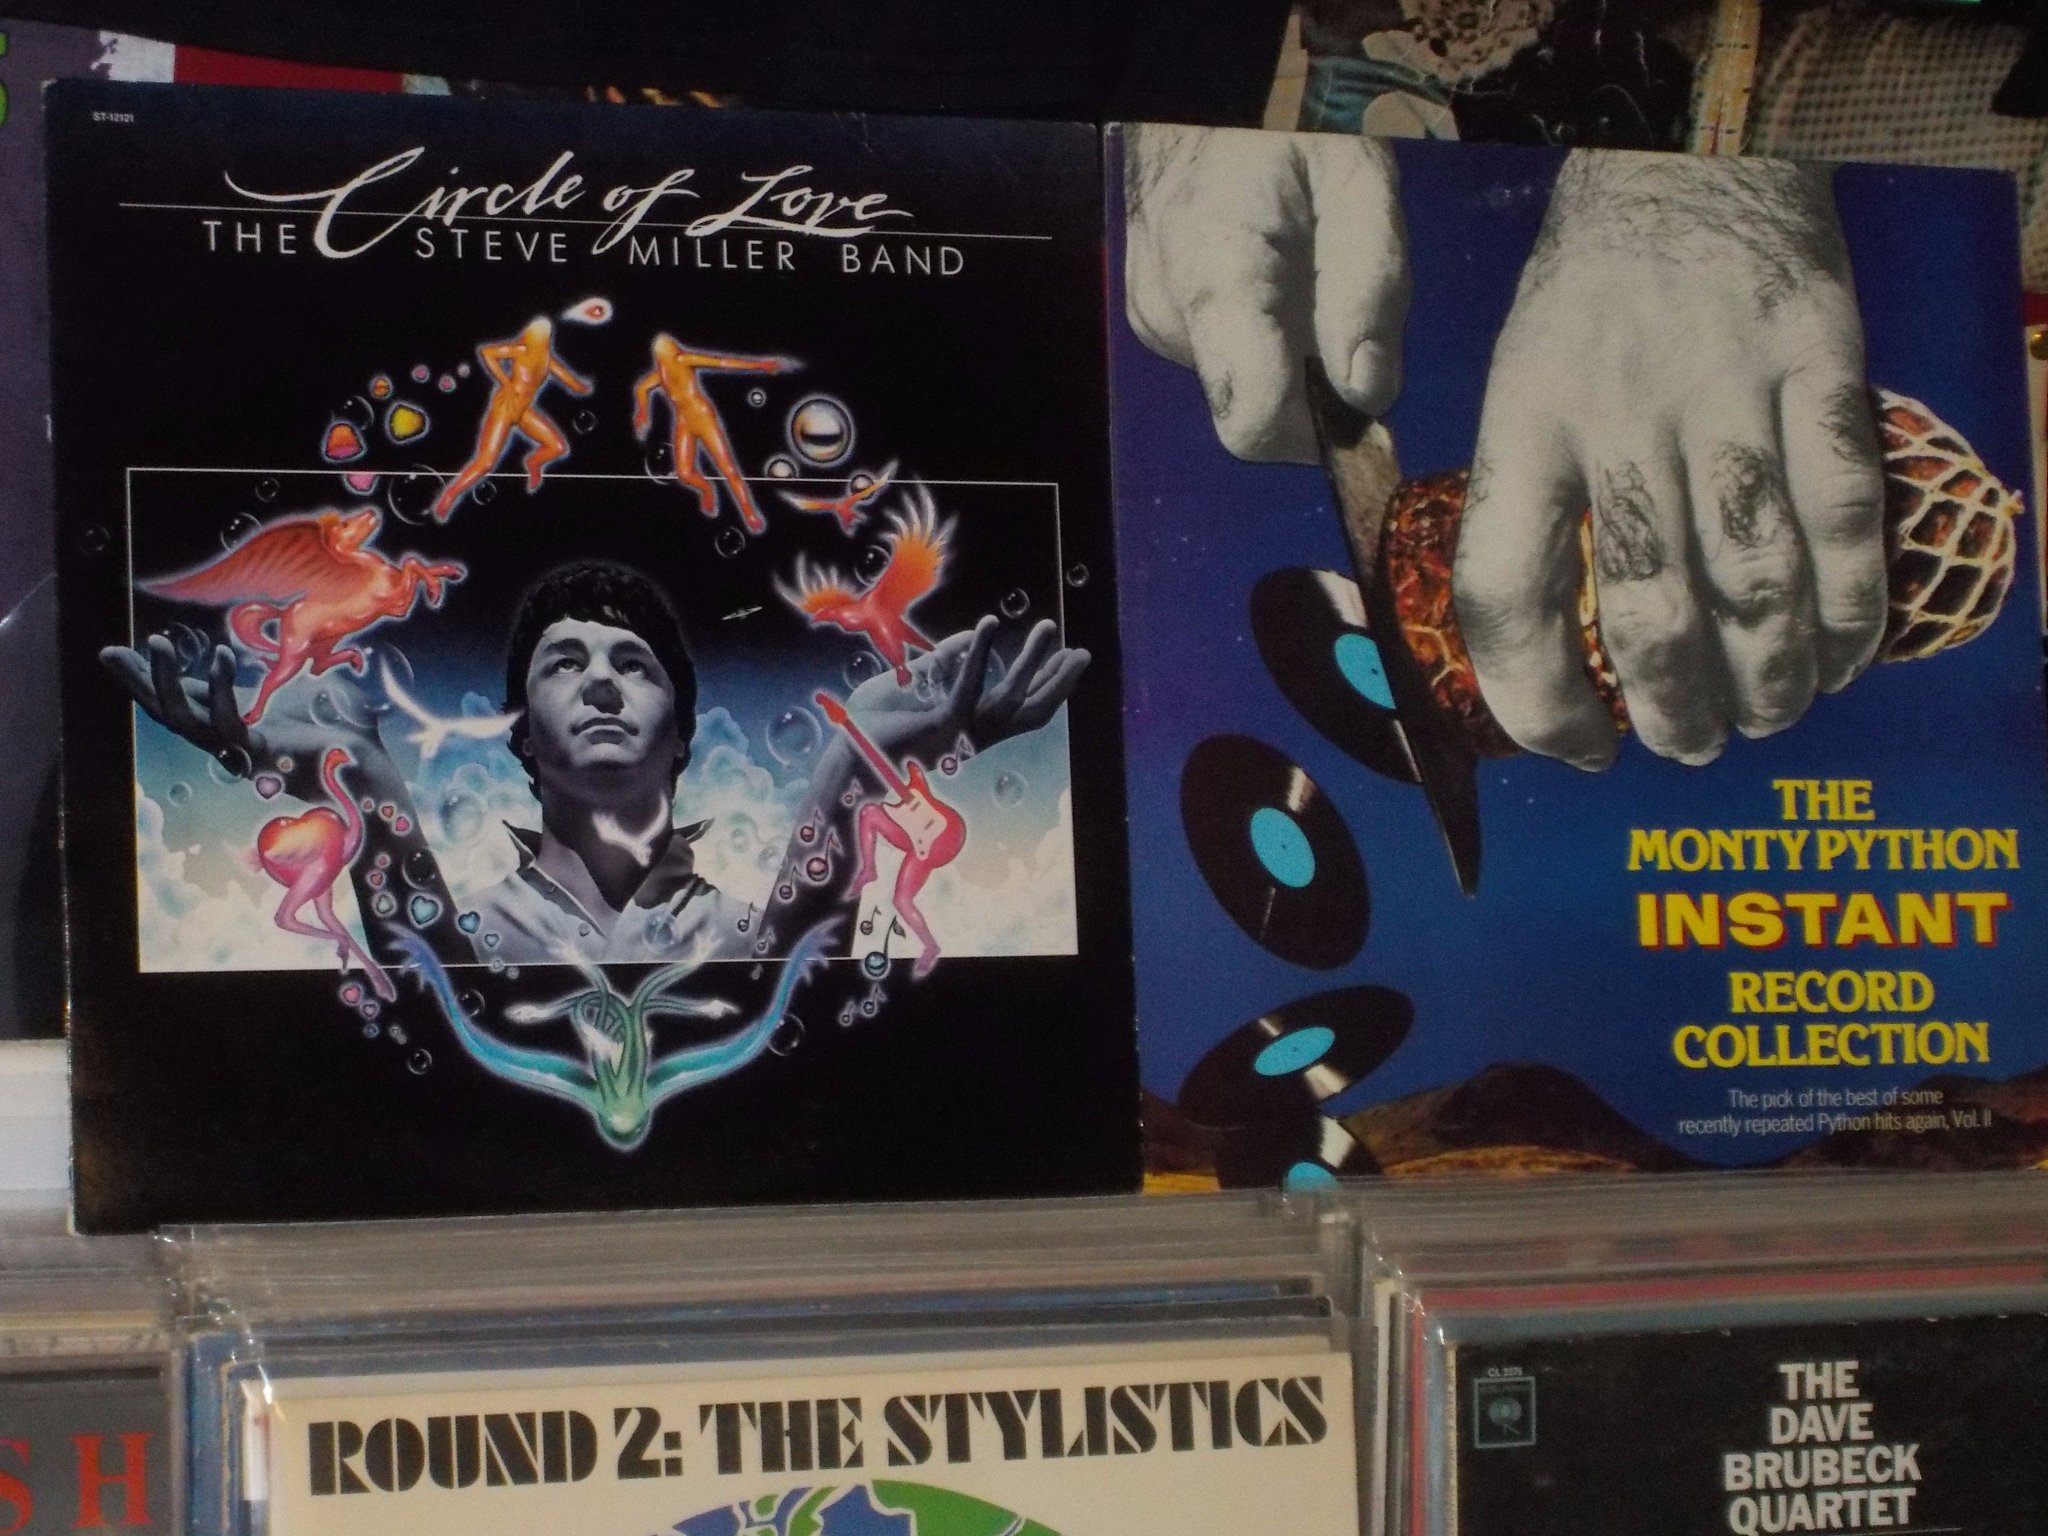 Happy Birthday to Byron Allred of the Steve Miller Band & John Cleese of Monty Python (coming to Omaha) 